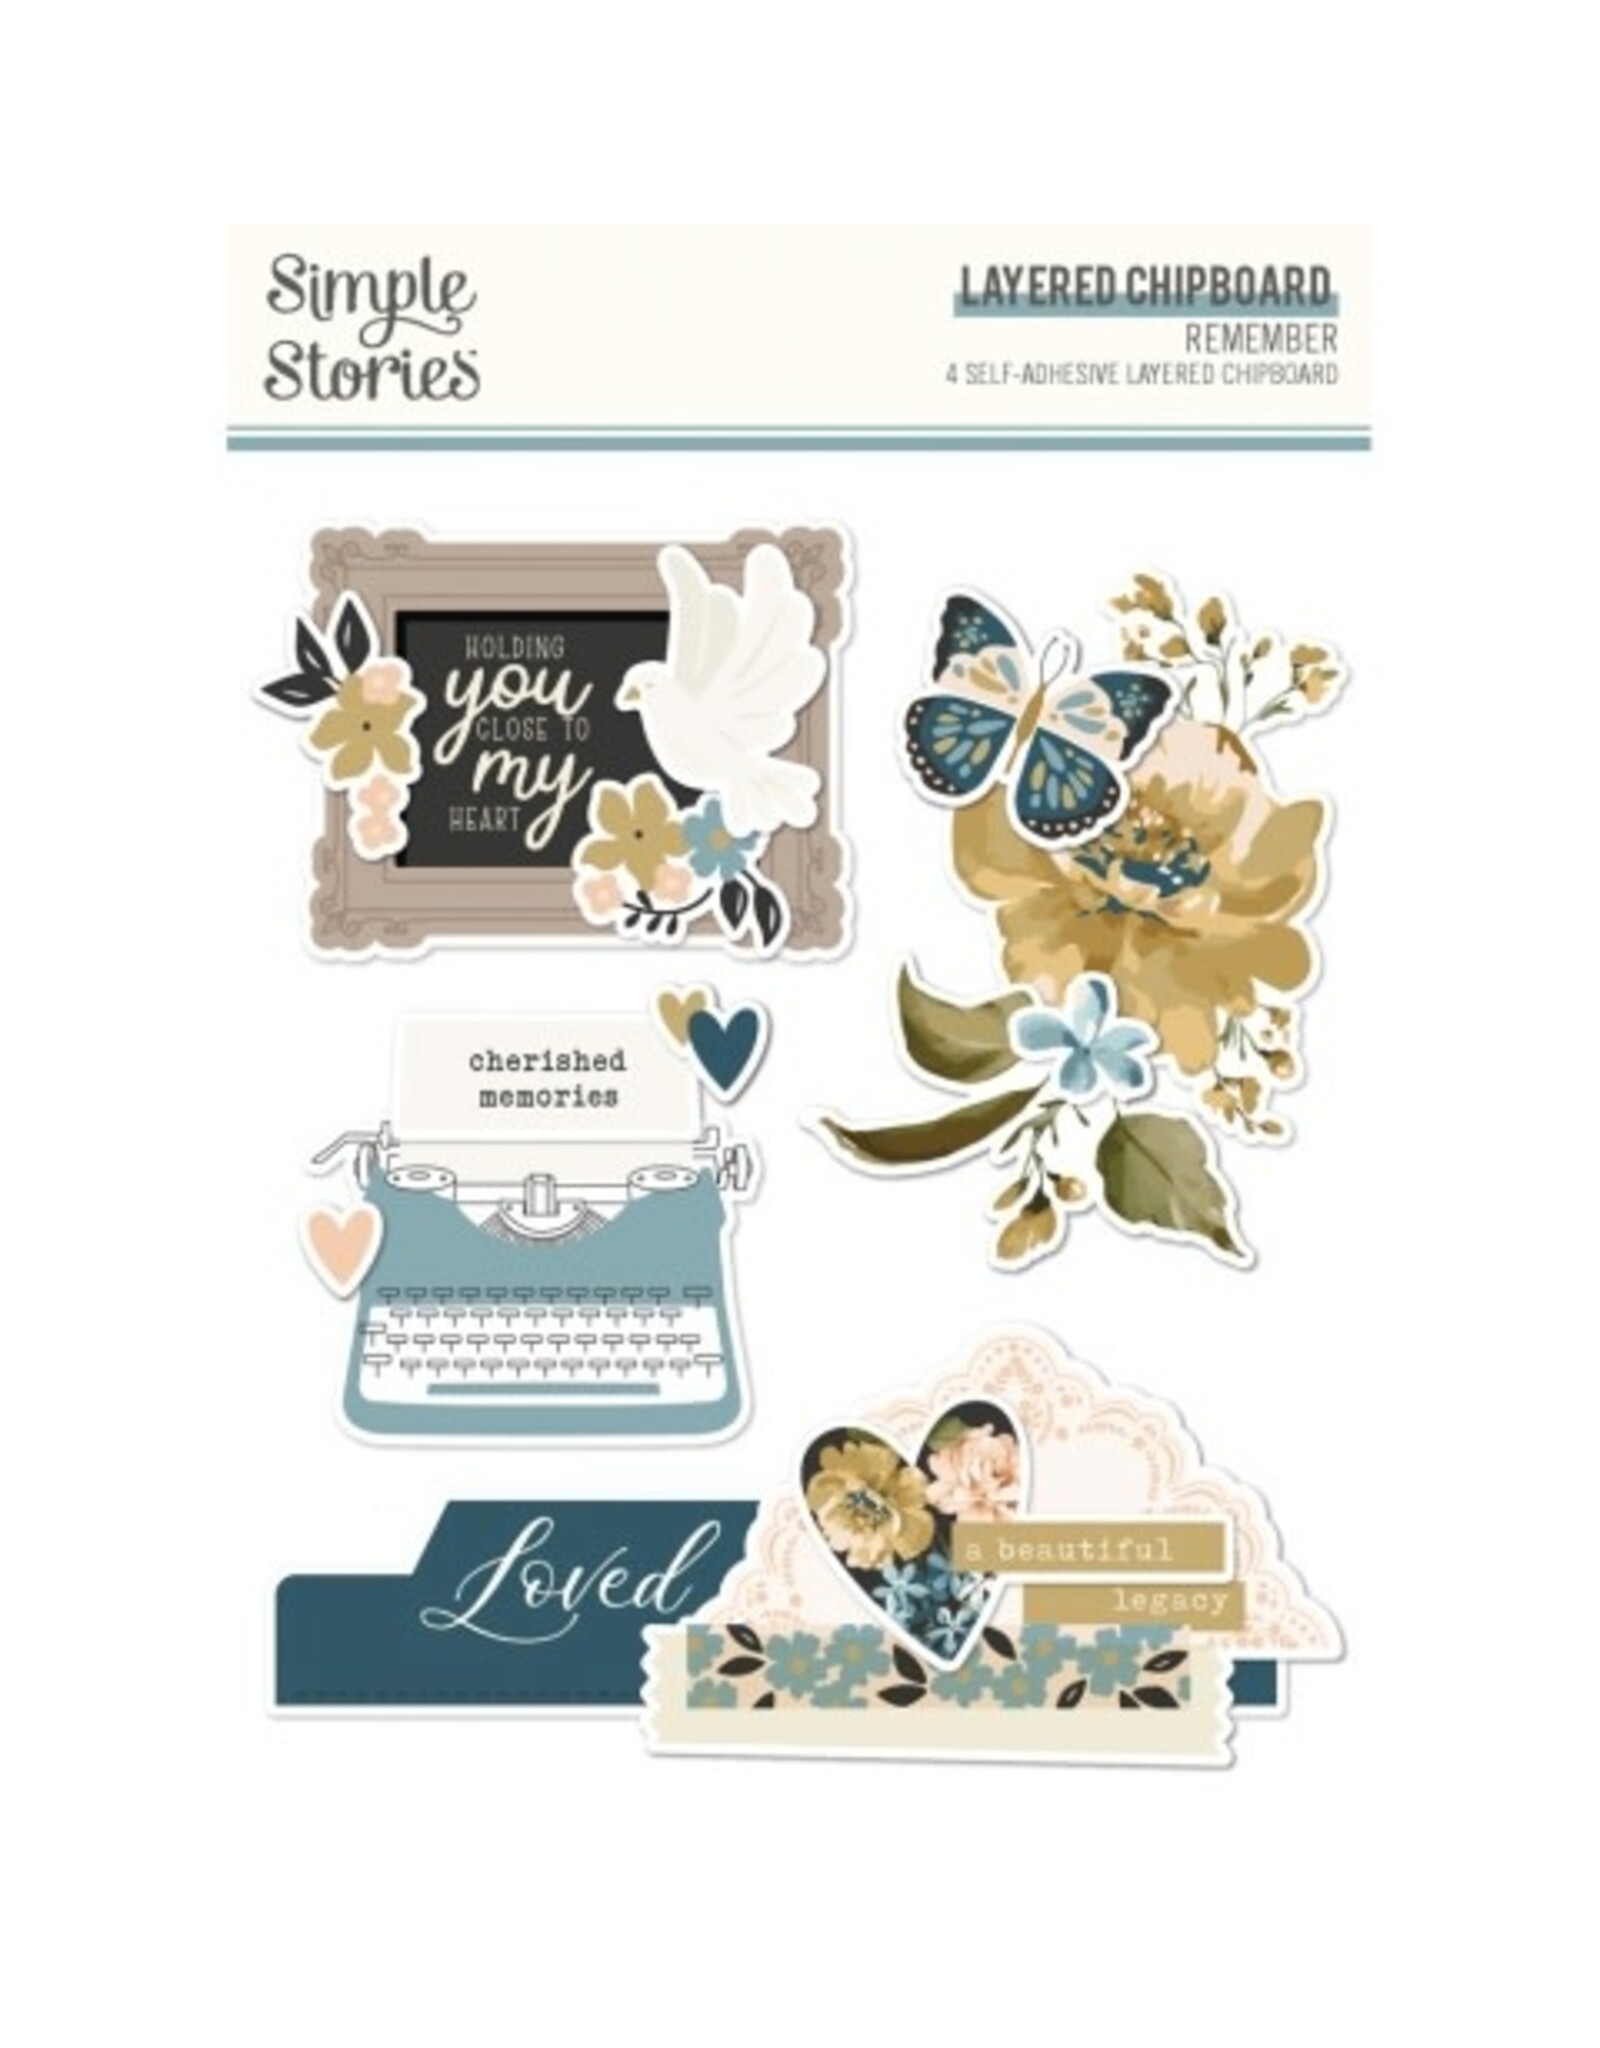 Simple Stories Remember - Layered Chipboard